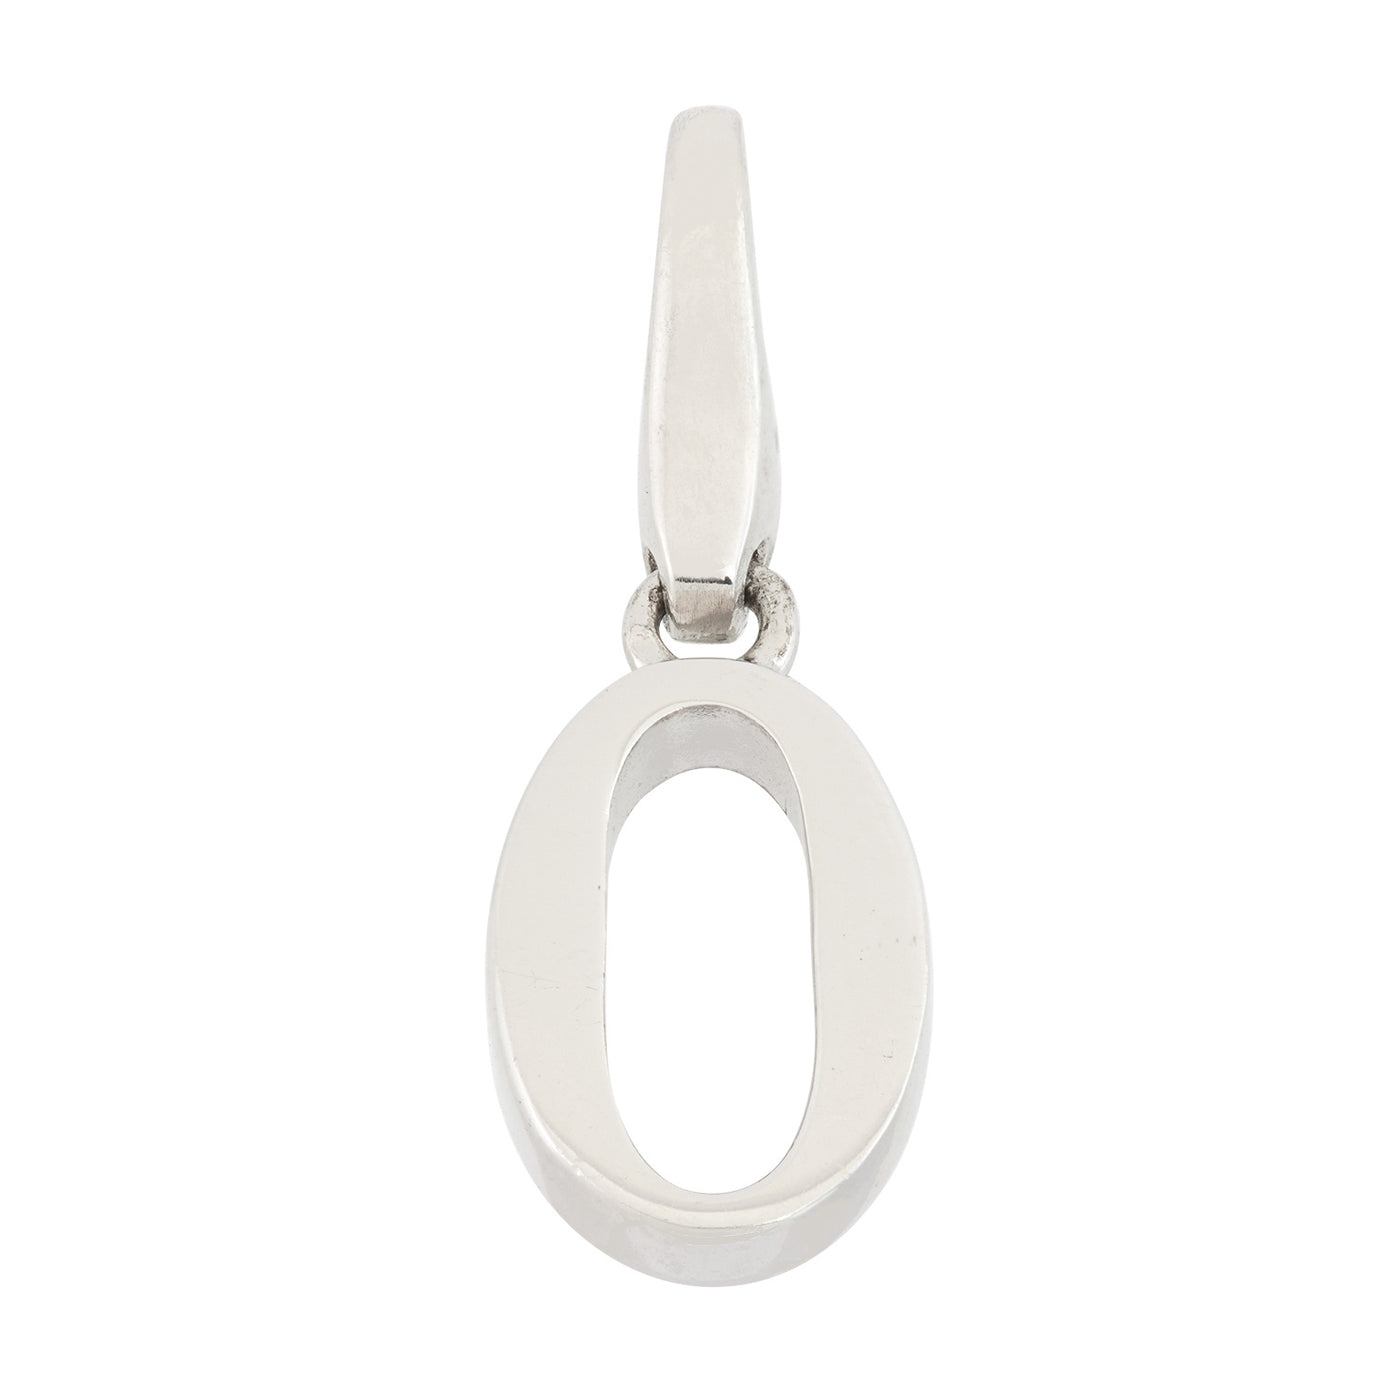 Rebecca Sloane Sterling Silver "0" With Cz Charm